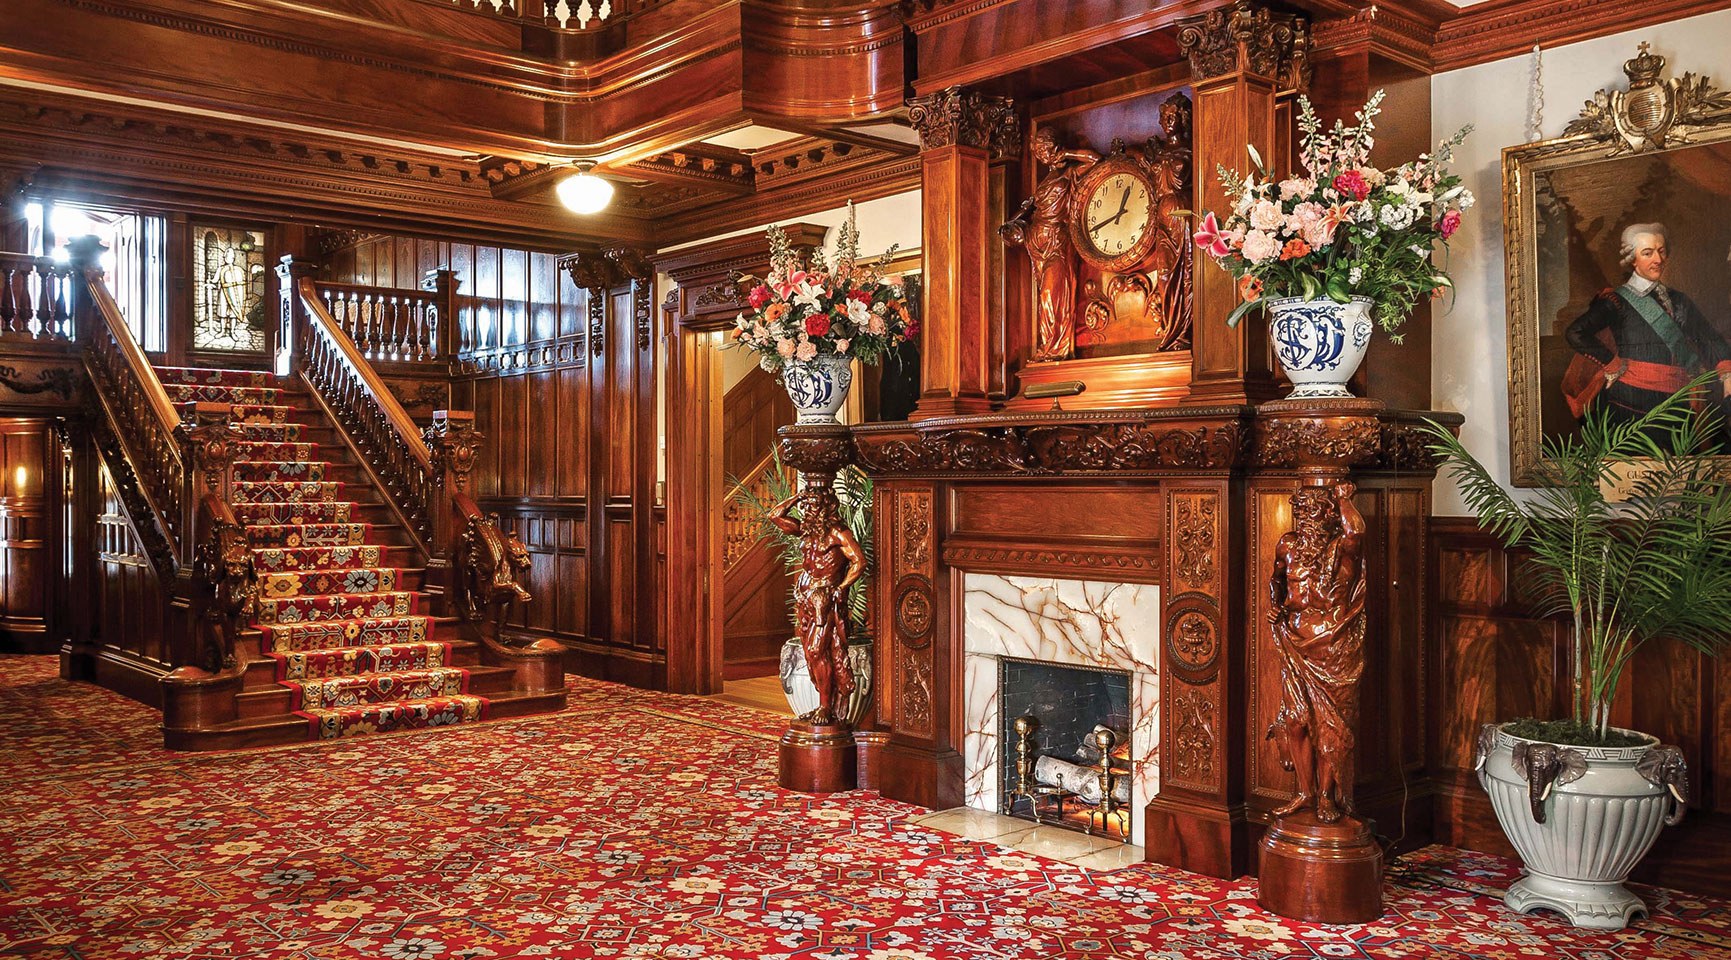 foyer of the mansion with the fireplace and staircase